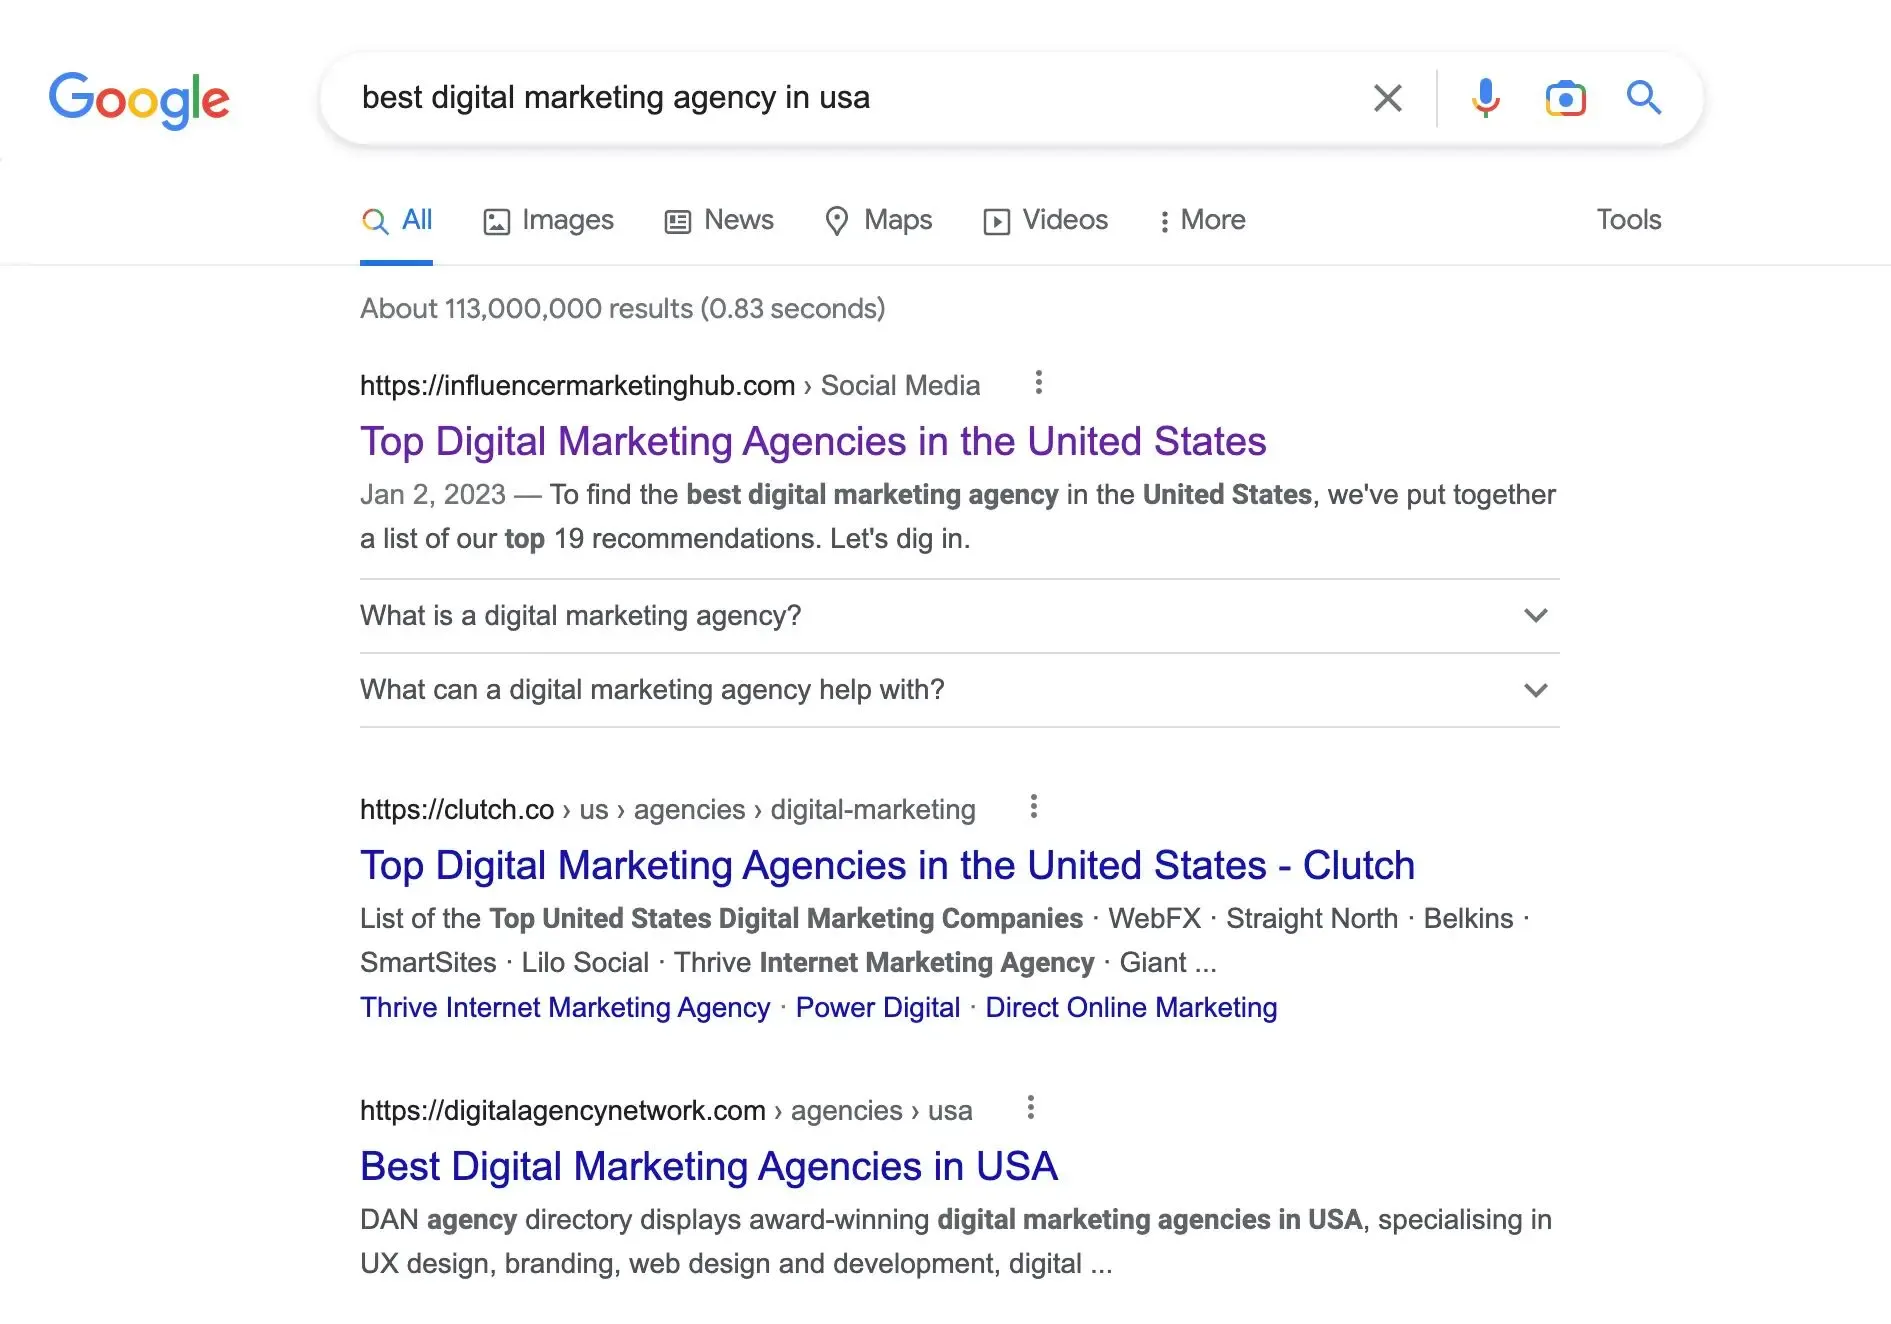 Organic search results for "best digital marketing agency in USA"